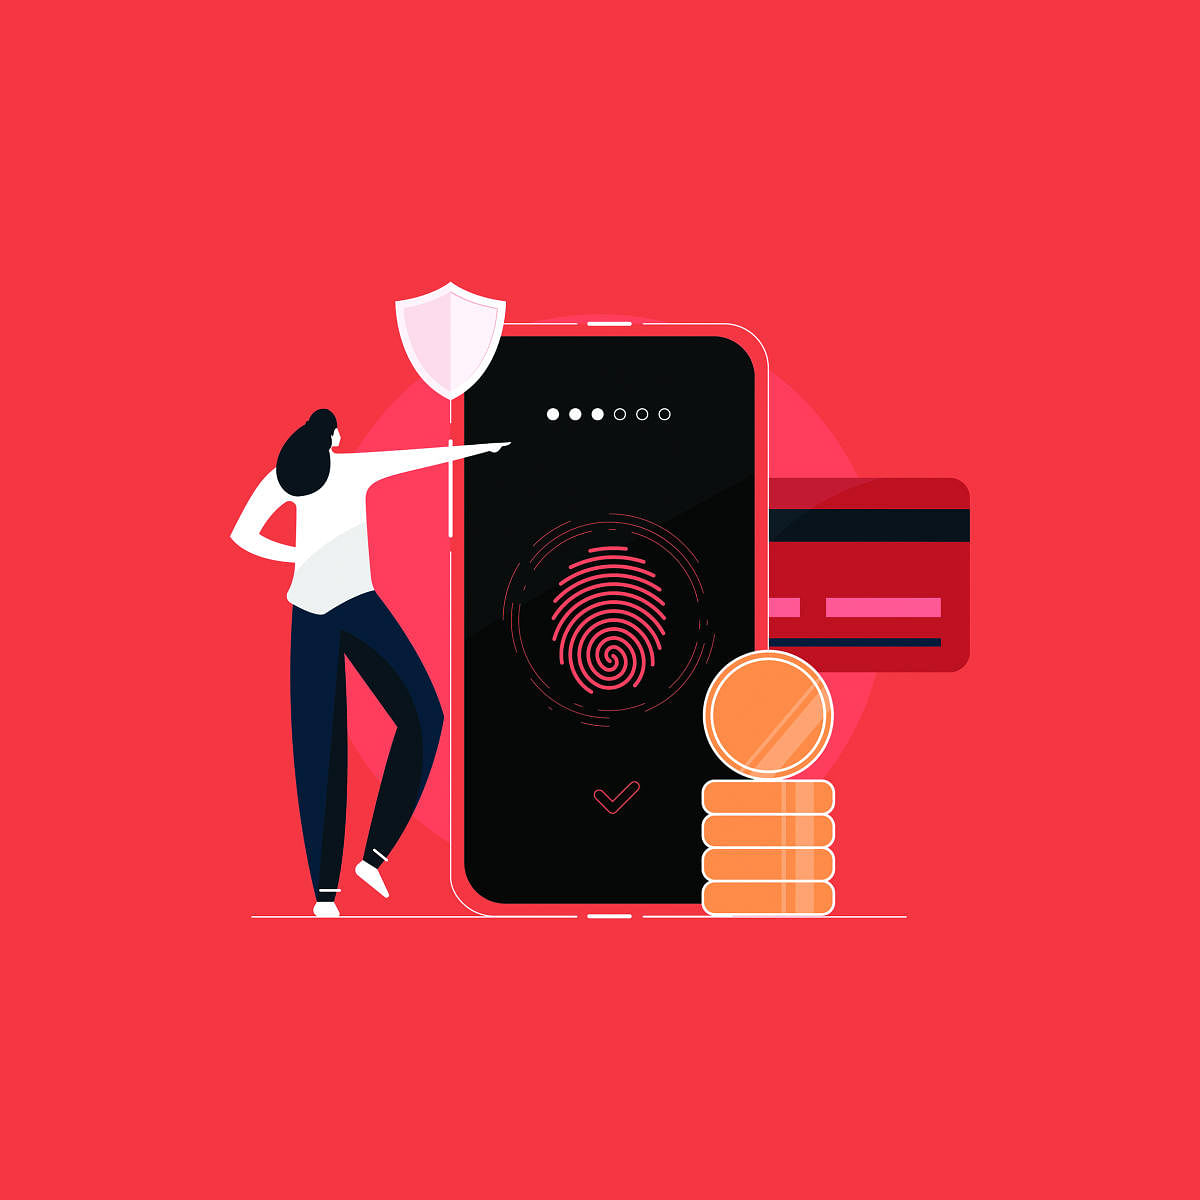 secure payment, secure personal data, Confidential Data Protection Concept illustration"iStock-111907105.jpg" "iStock-583713032.jpg" "iStock-1221800191.jpg" "iStock-1281183576.jpg"